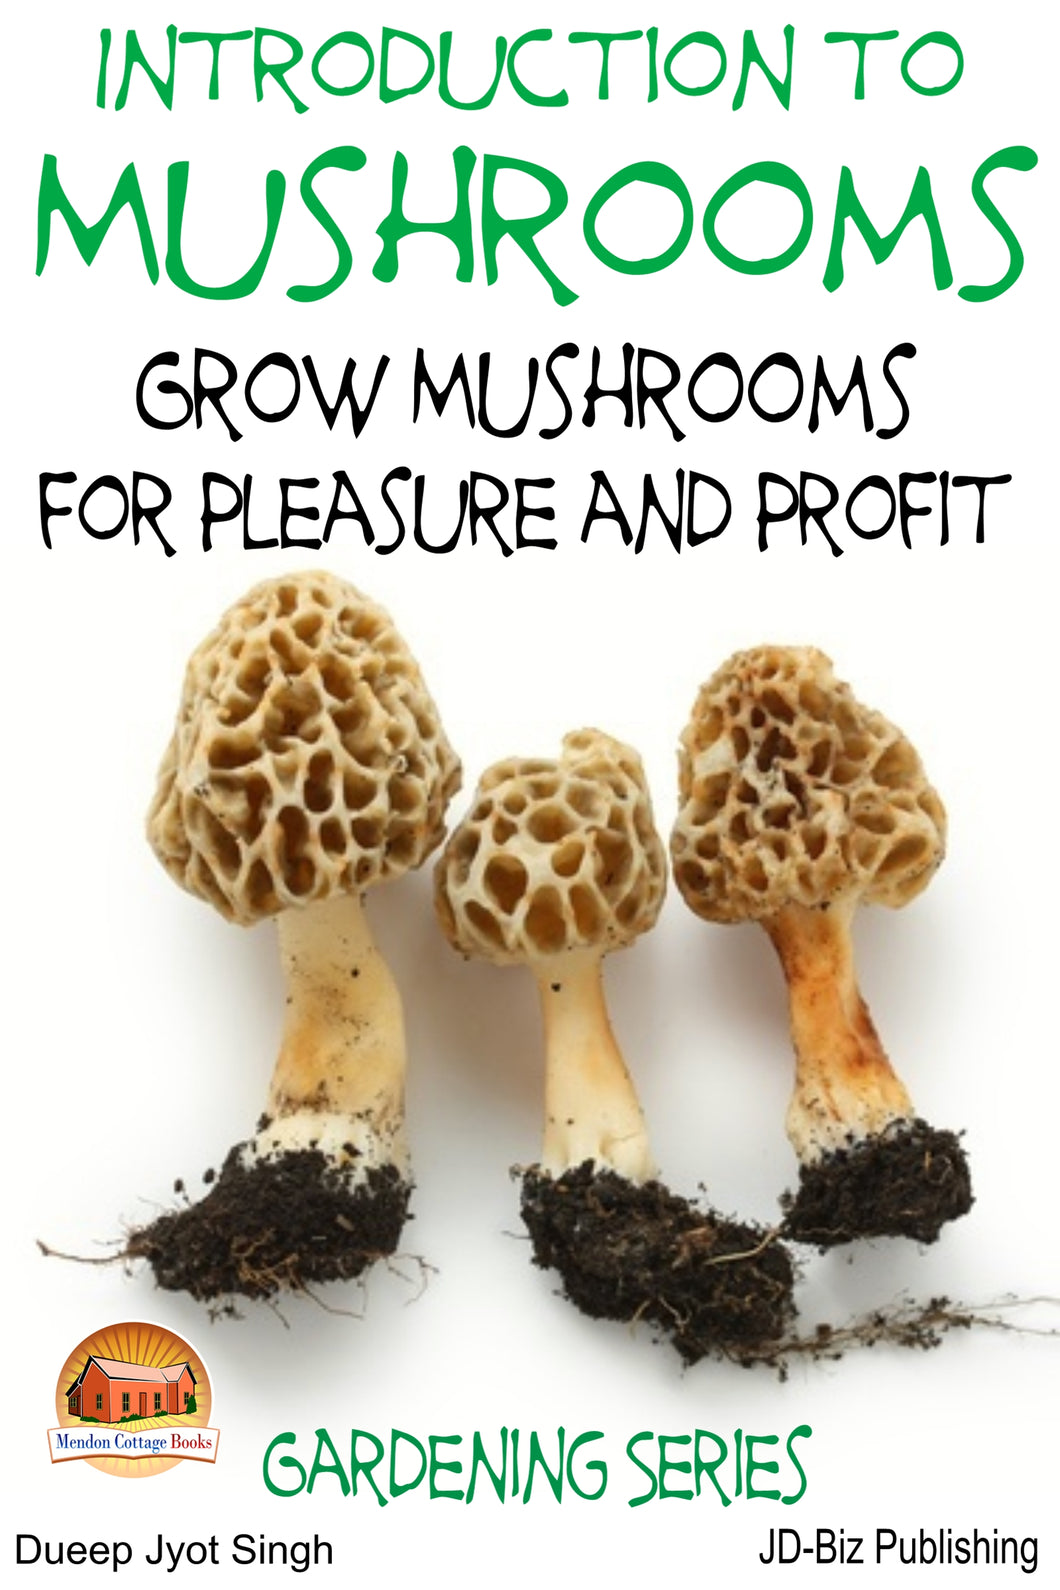 Introduction to Mushrooms